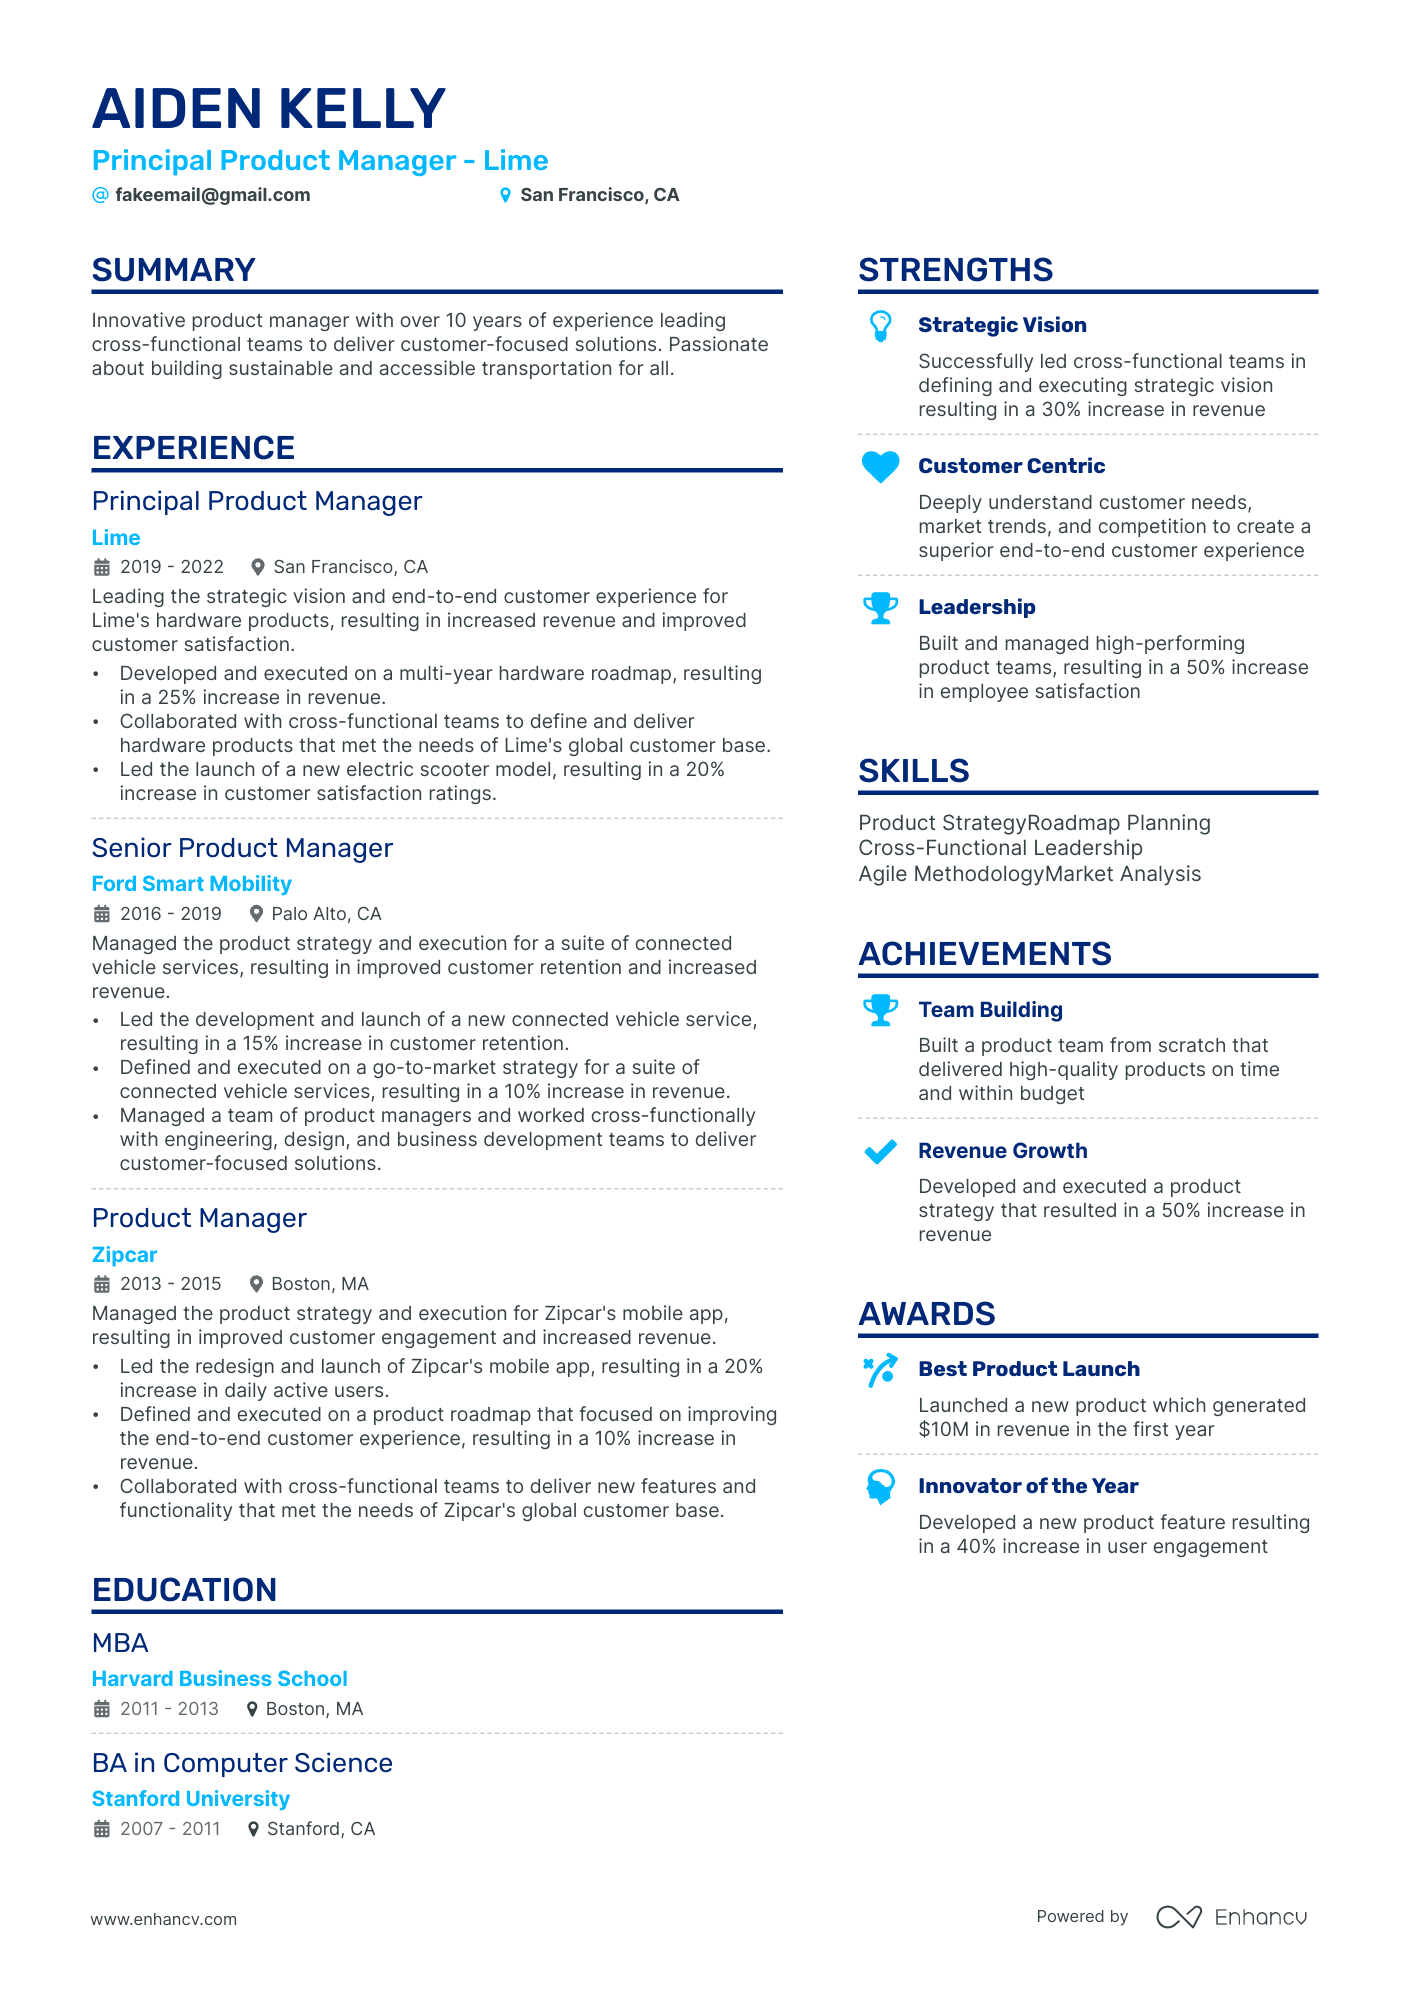 principal product manager resume example